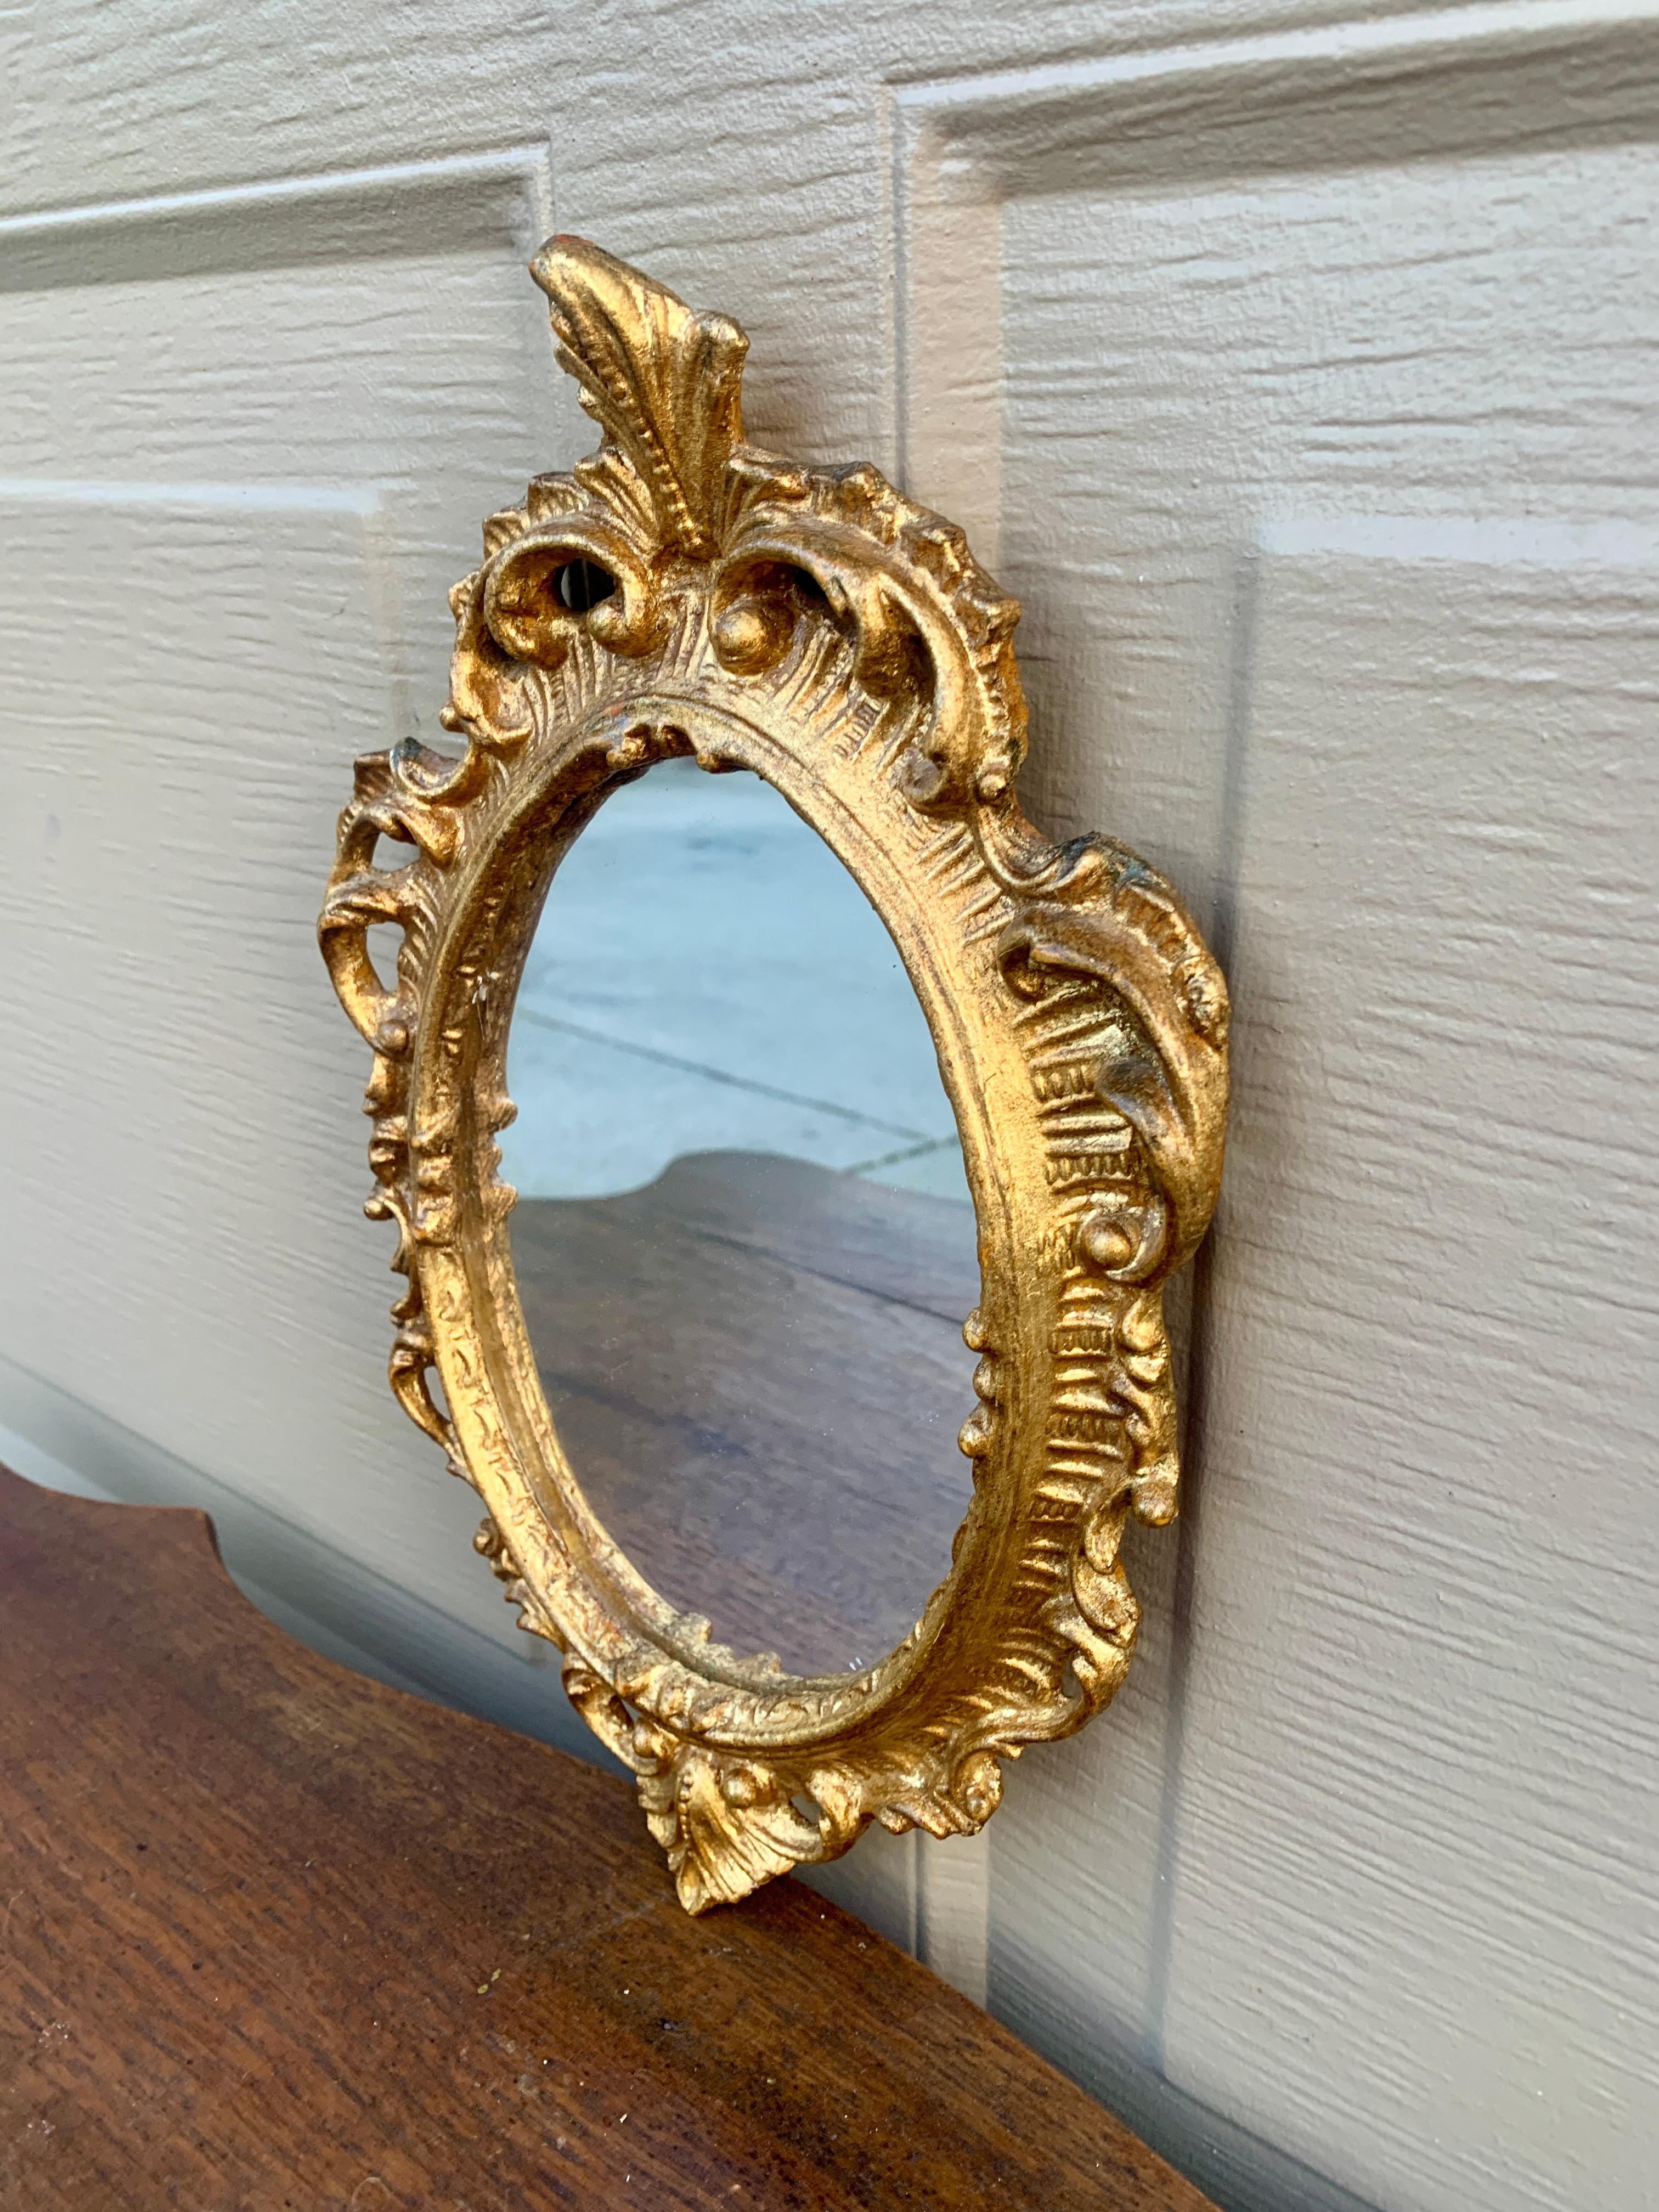 Italian Florentine Baroque Gold Giltwood Wall Mirrors, Set of Three For Sale 4